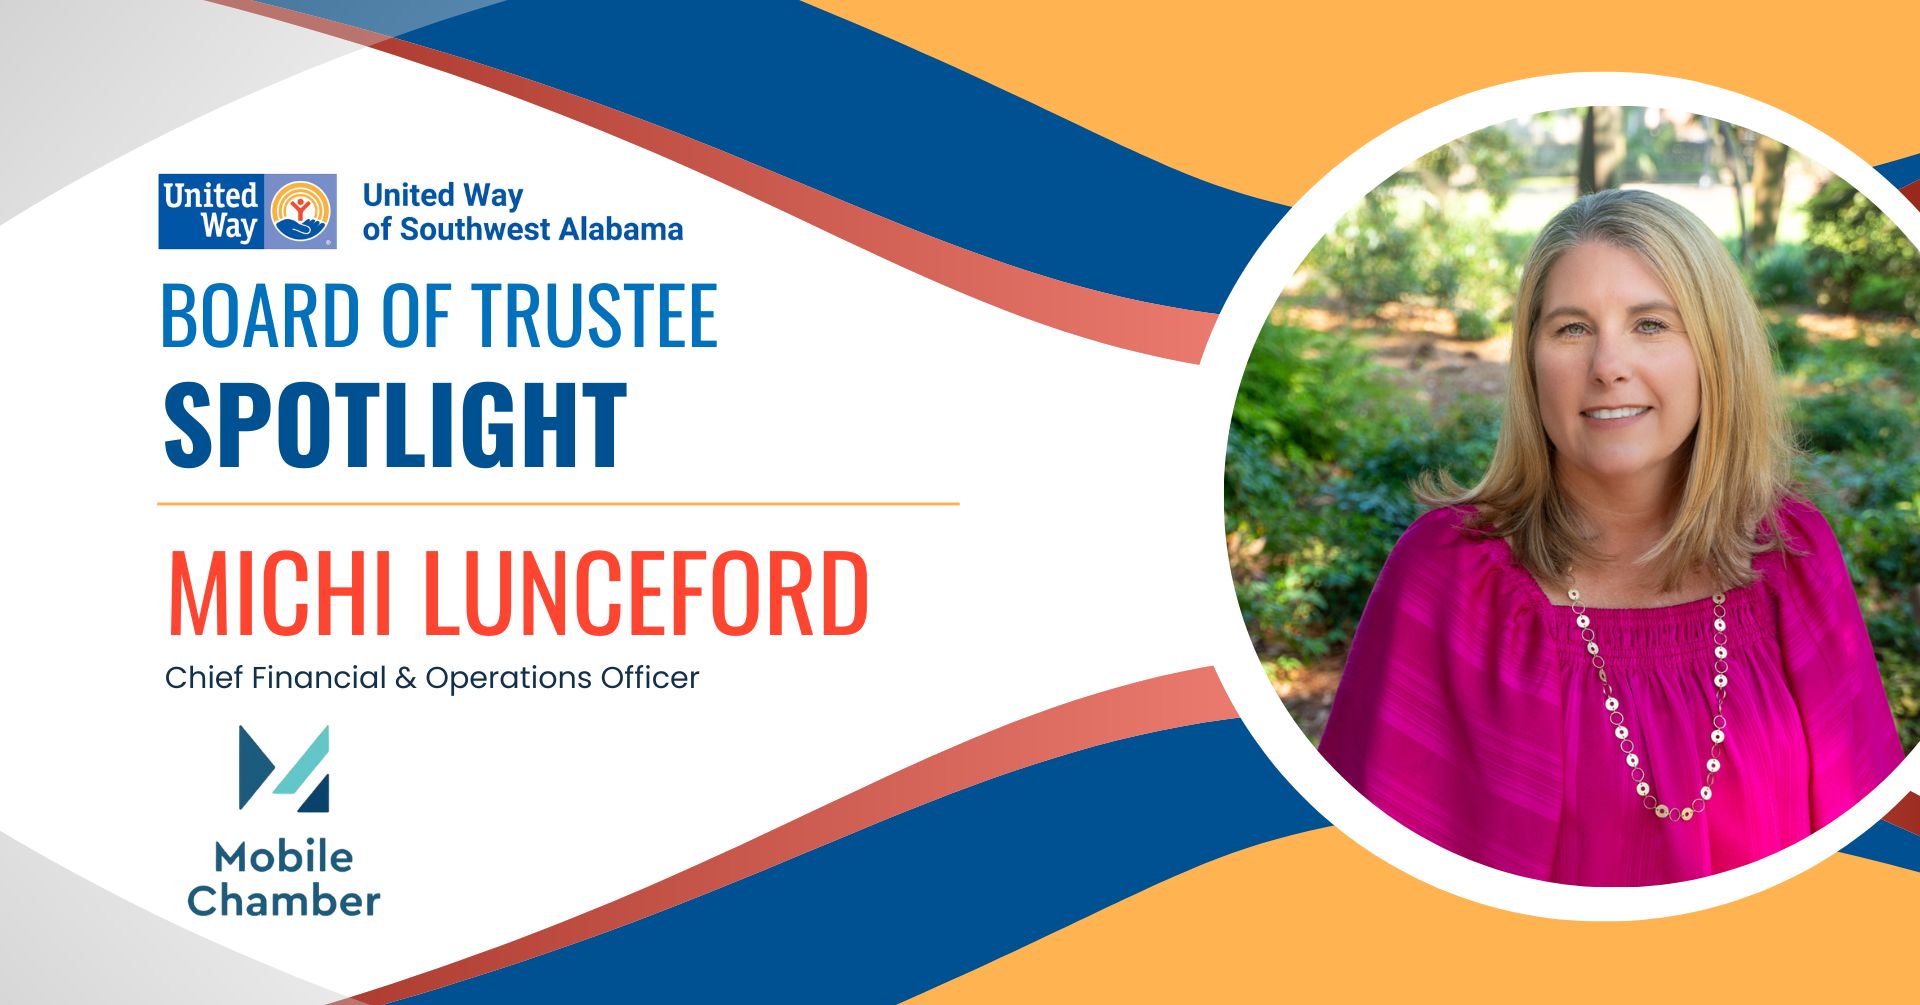 UWSWA Board of Trustee Spotlight: Michi Lunceford, Chief Financial & Operations Officer at the Mobile Chamber